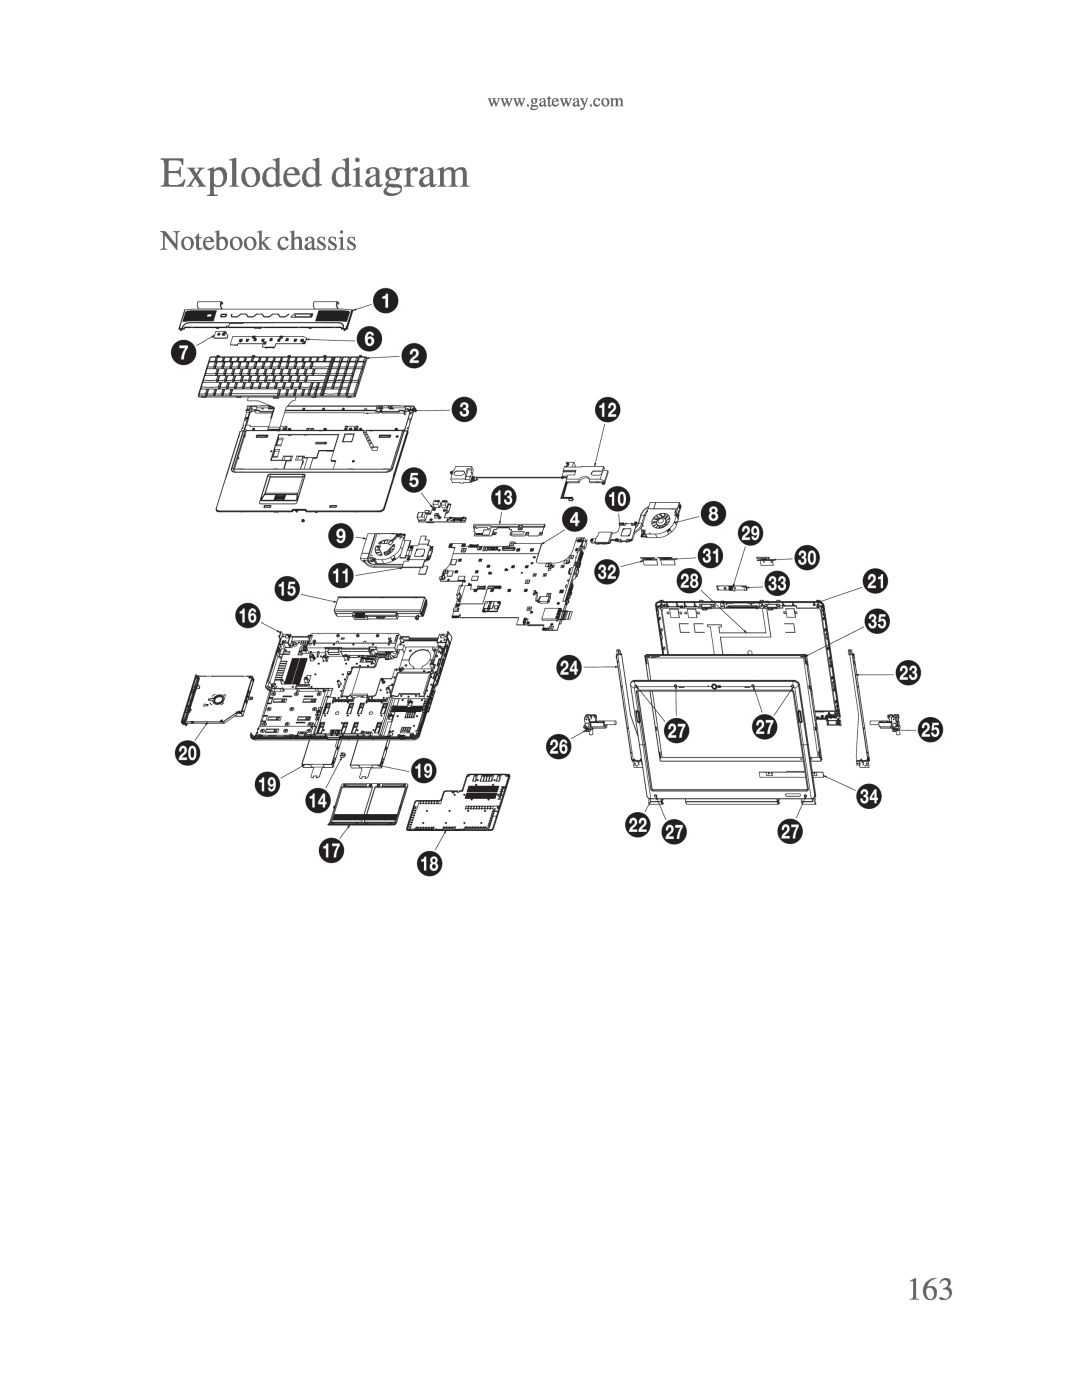 Gateway p-79 manual Exploded diagram, Notebook chassis 